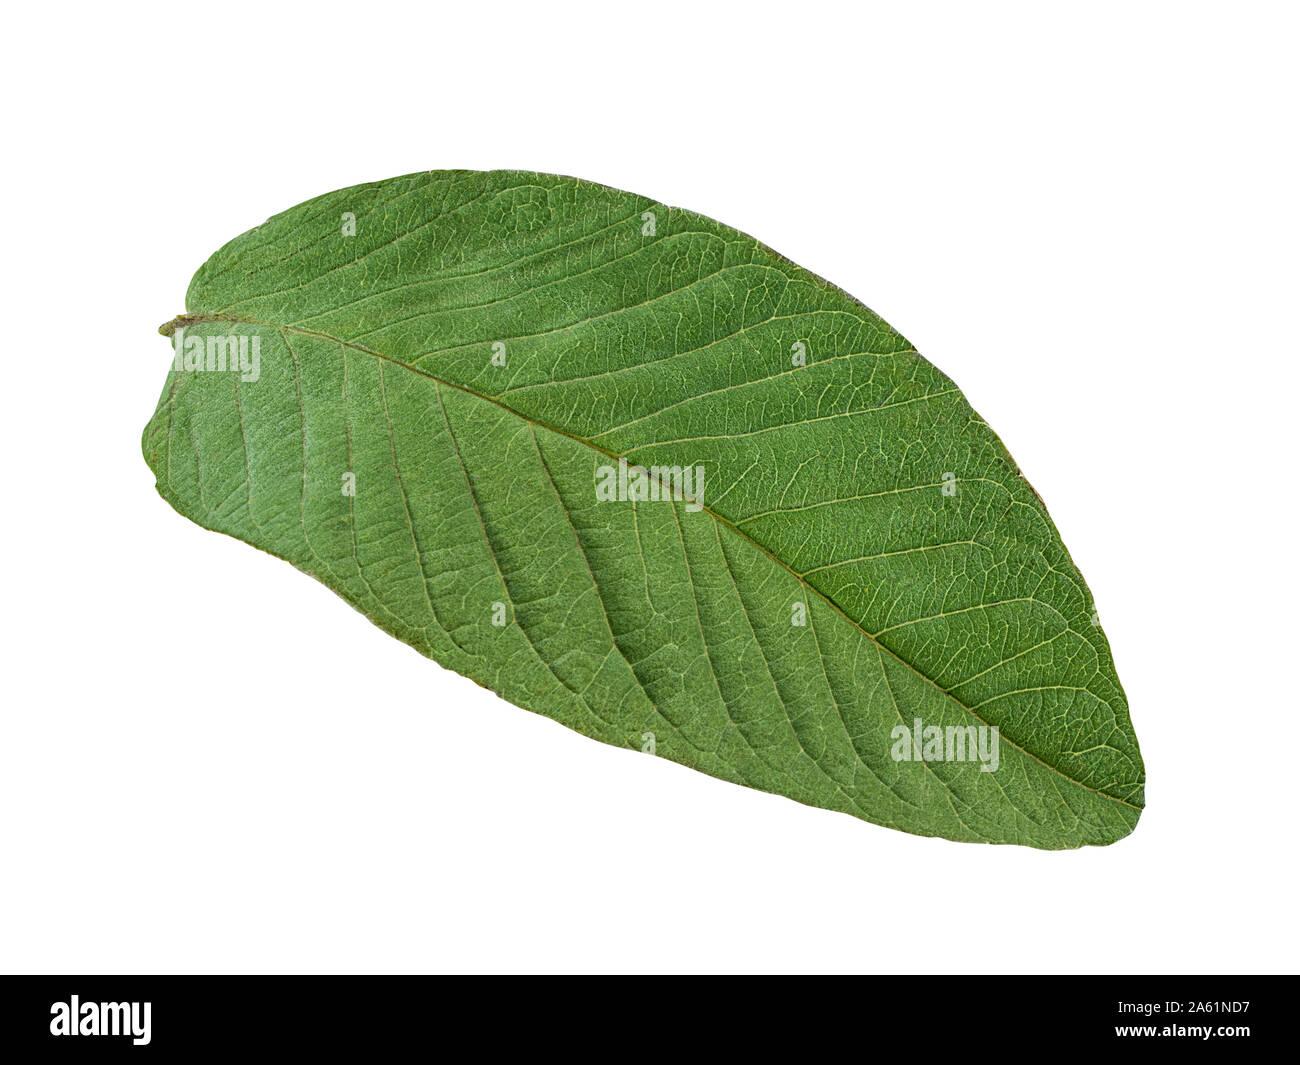 Guava Leaf High Resolution Stock Photography And Images Alamy Seeking for free guava png images? https www alamy com guava leaf isolated on white background image330723715 html